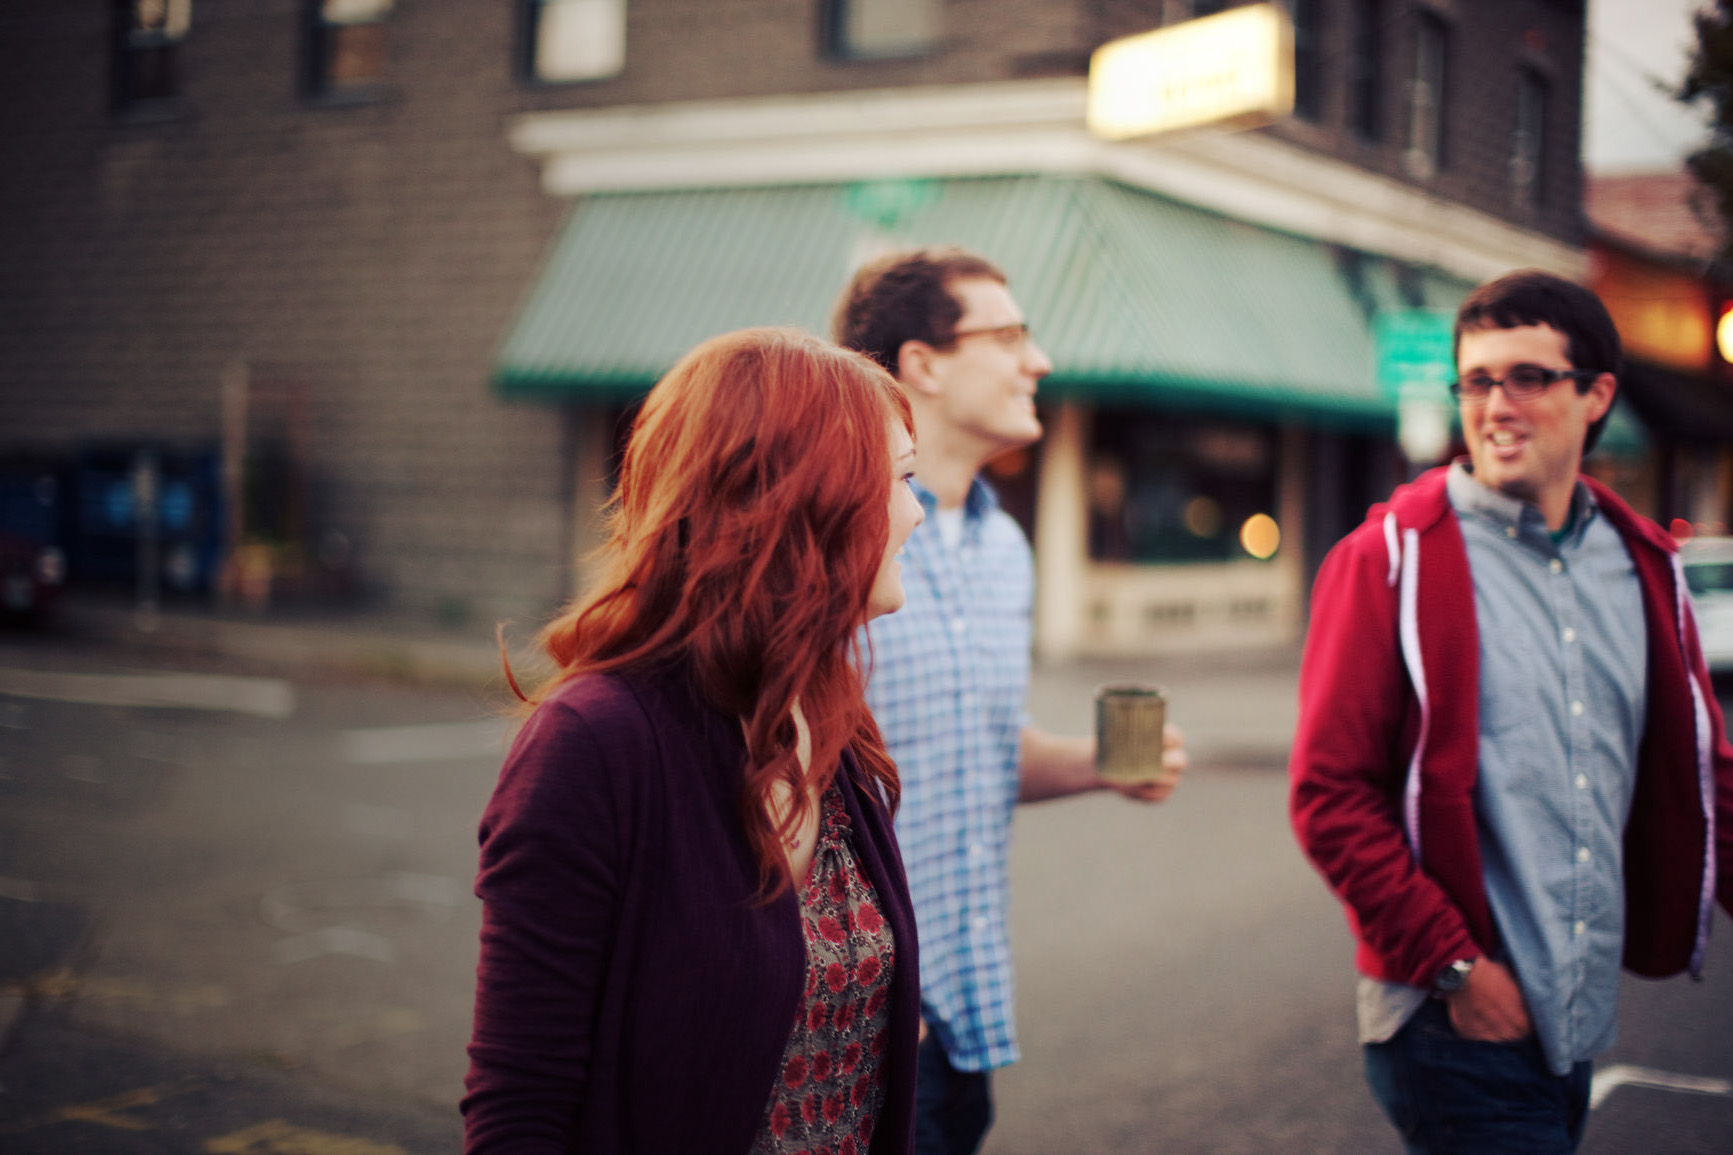 Young people drinking coffee and crossing the street